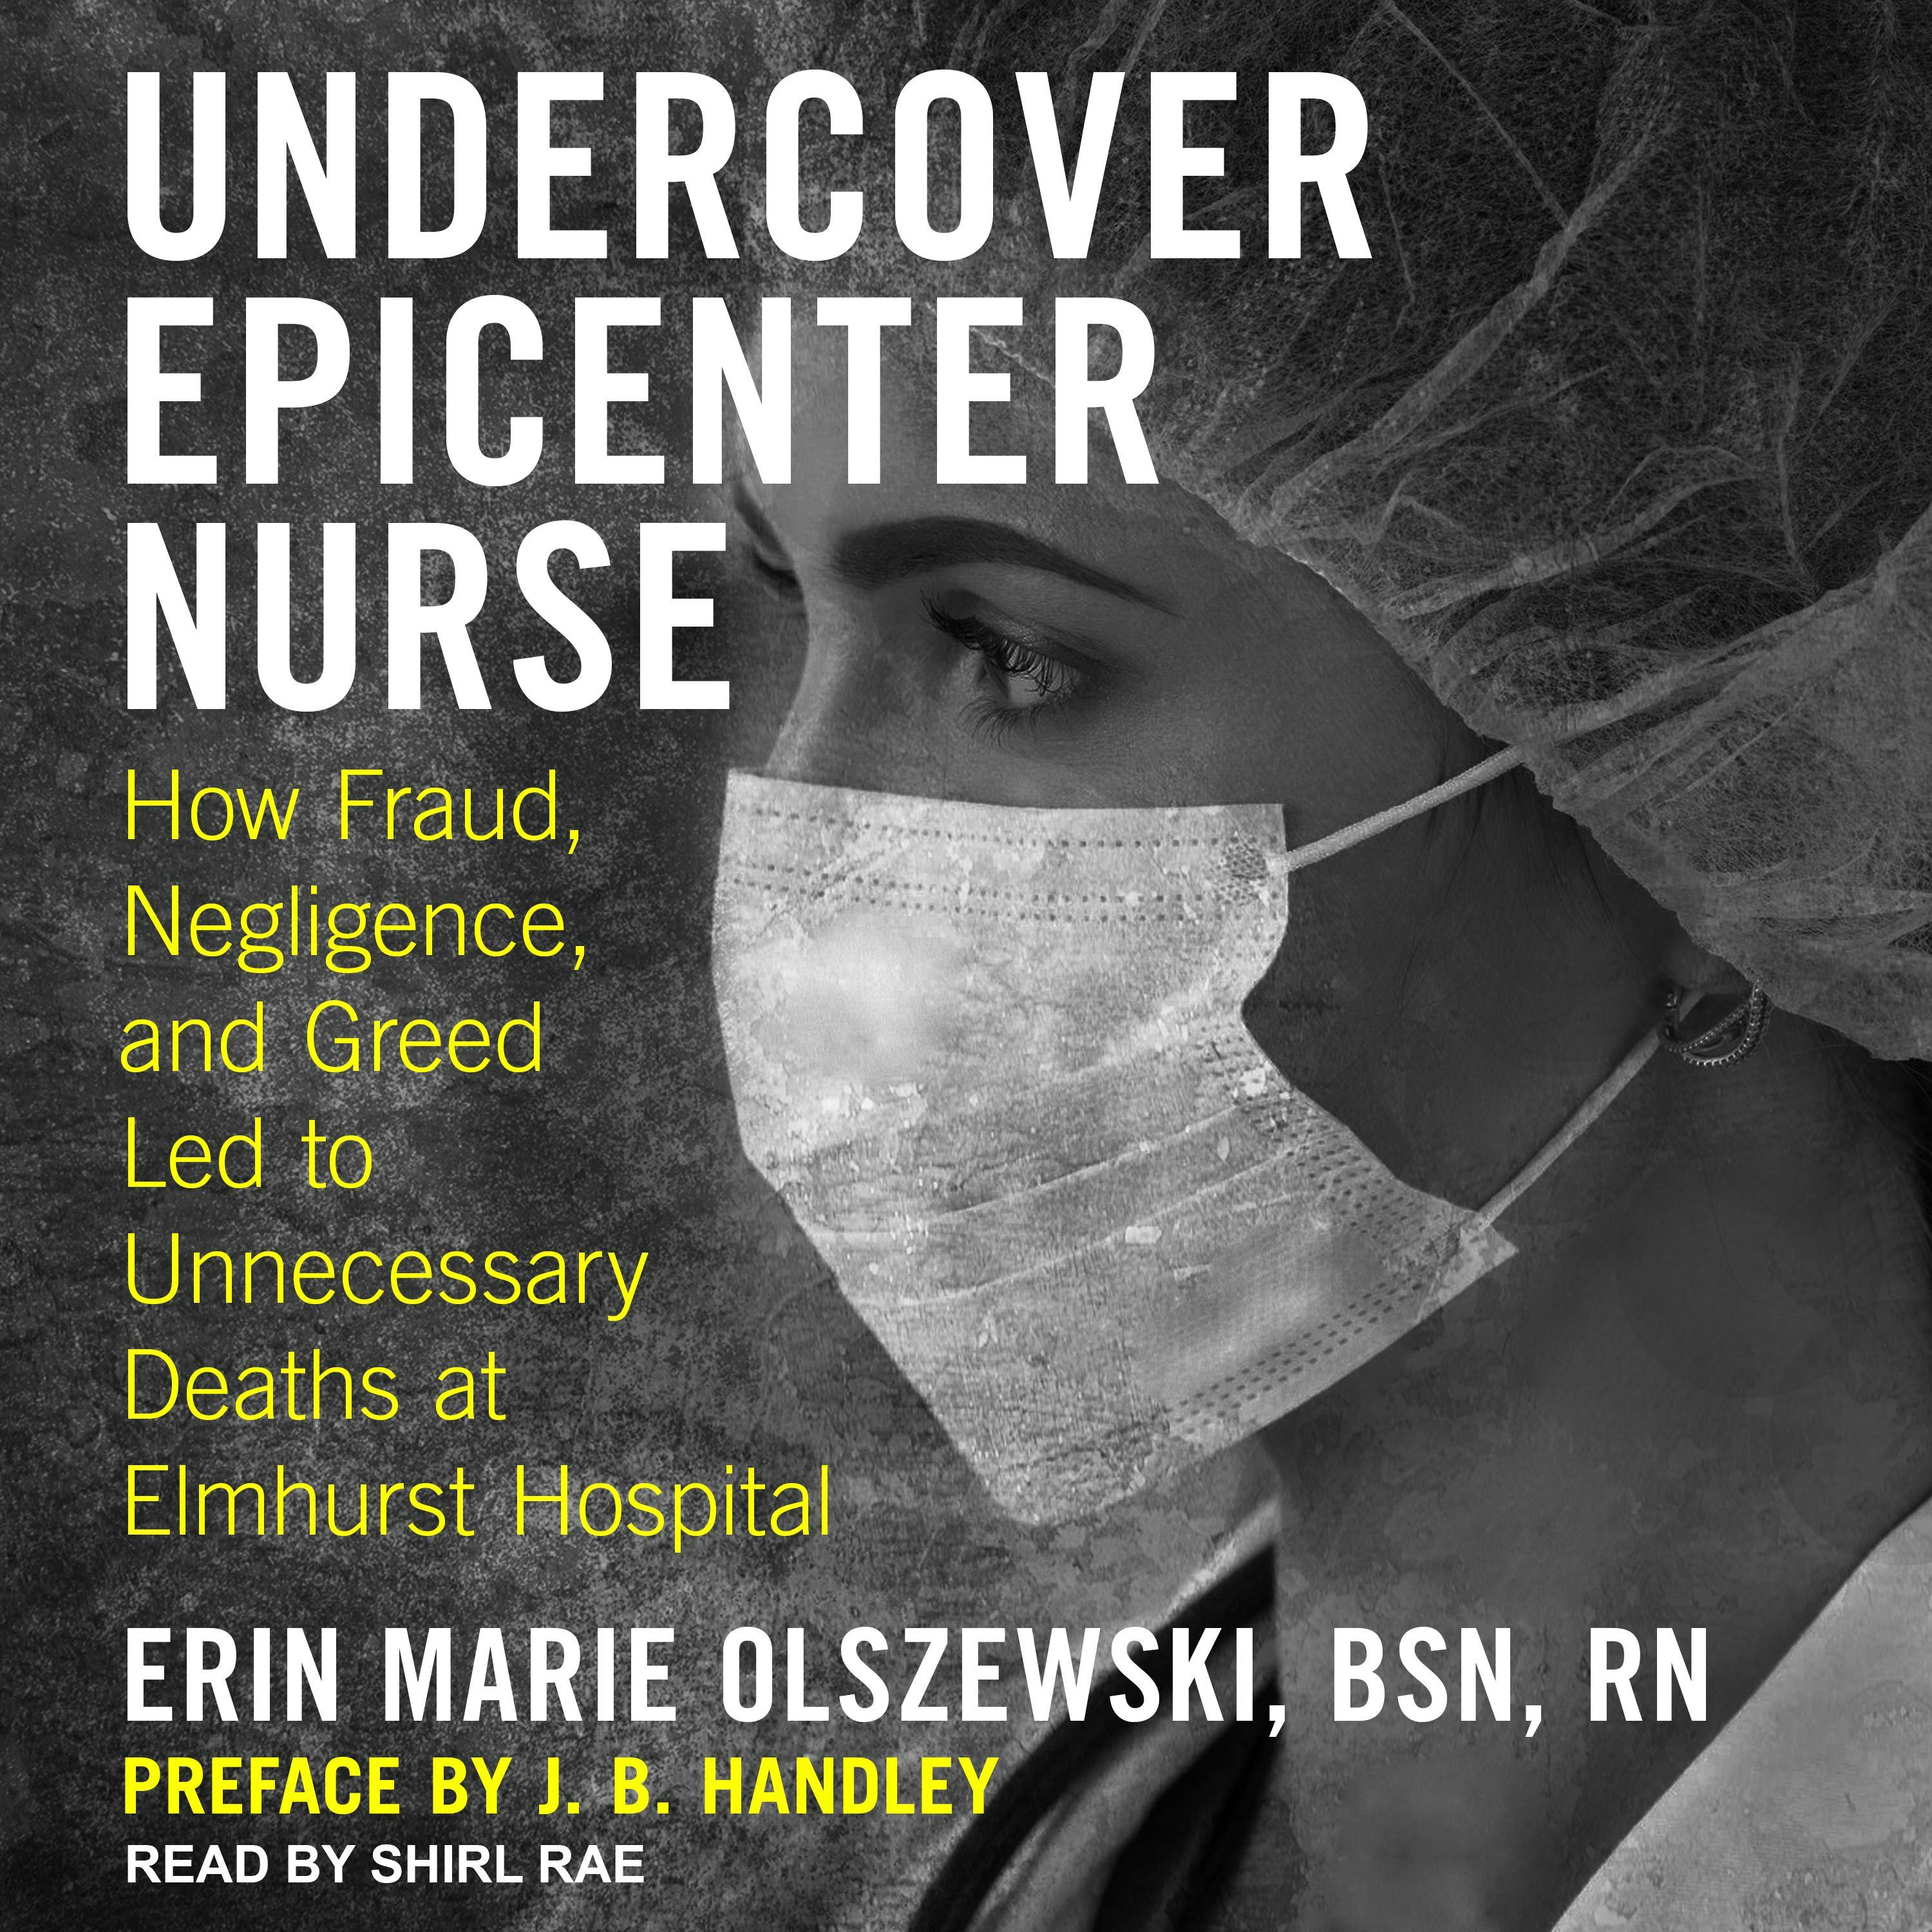 Undercover Epicenter Nurse: How Fraud, Negligence, and Greed Led to Unnecessary Deaths at Elmhurst Hospital - RN, J. B. Handley